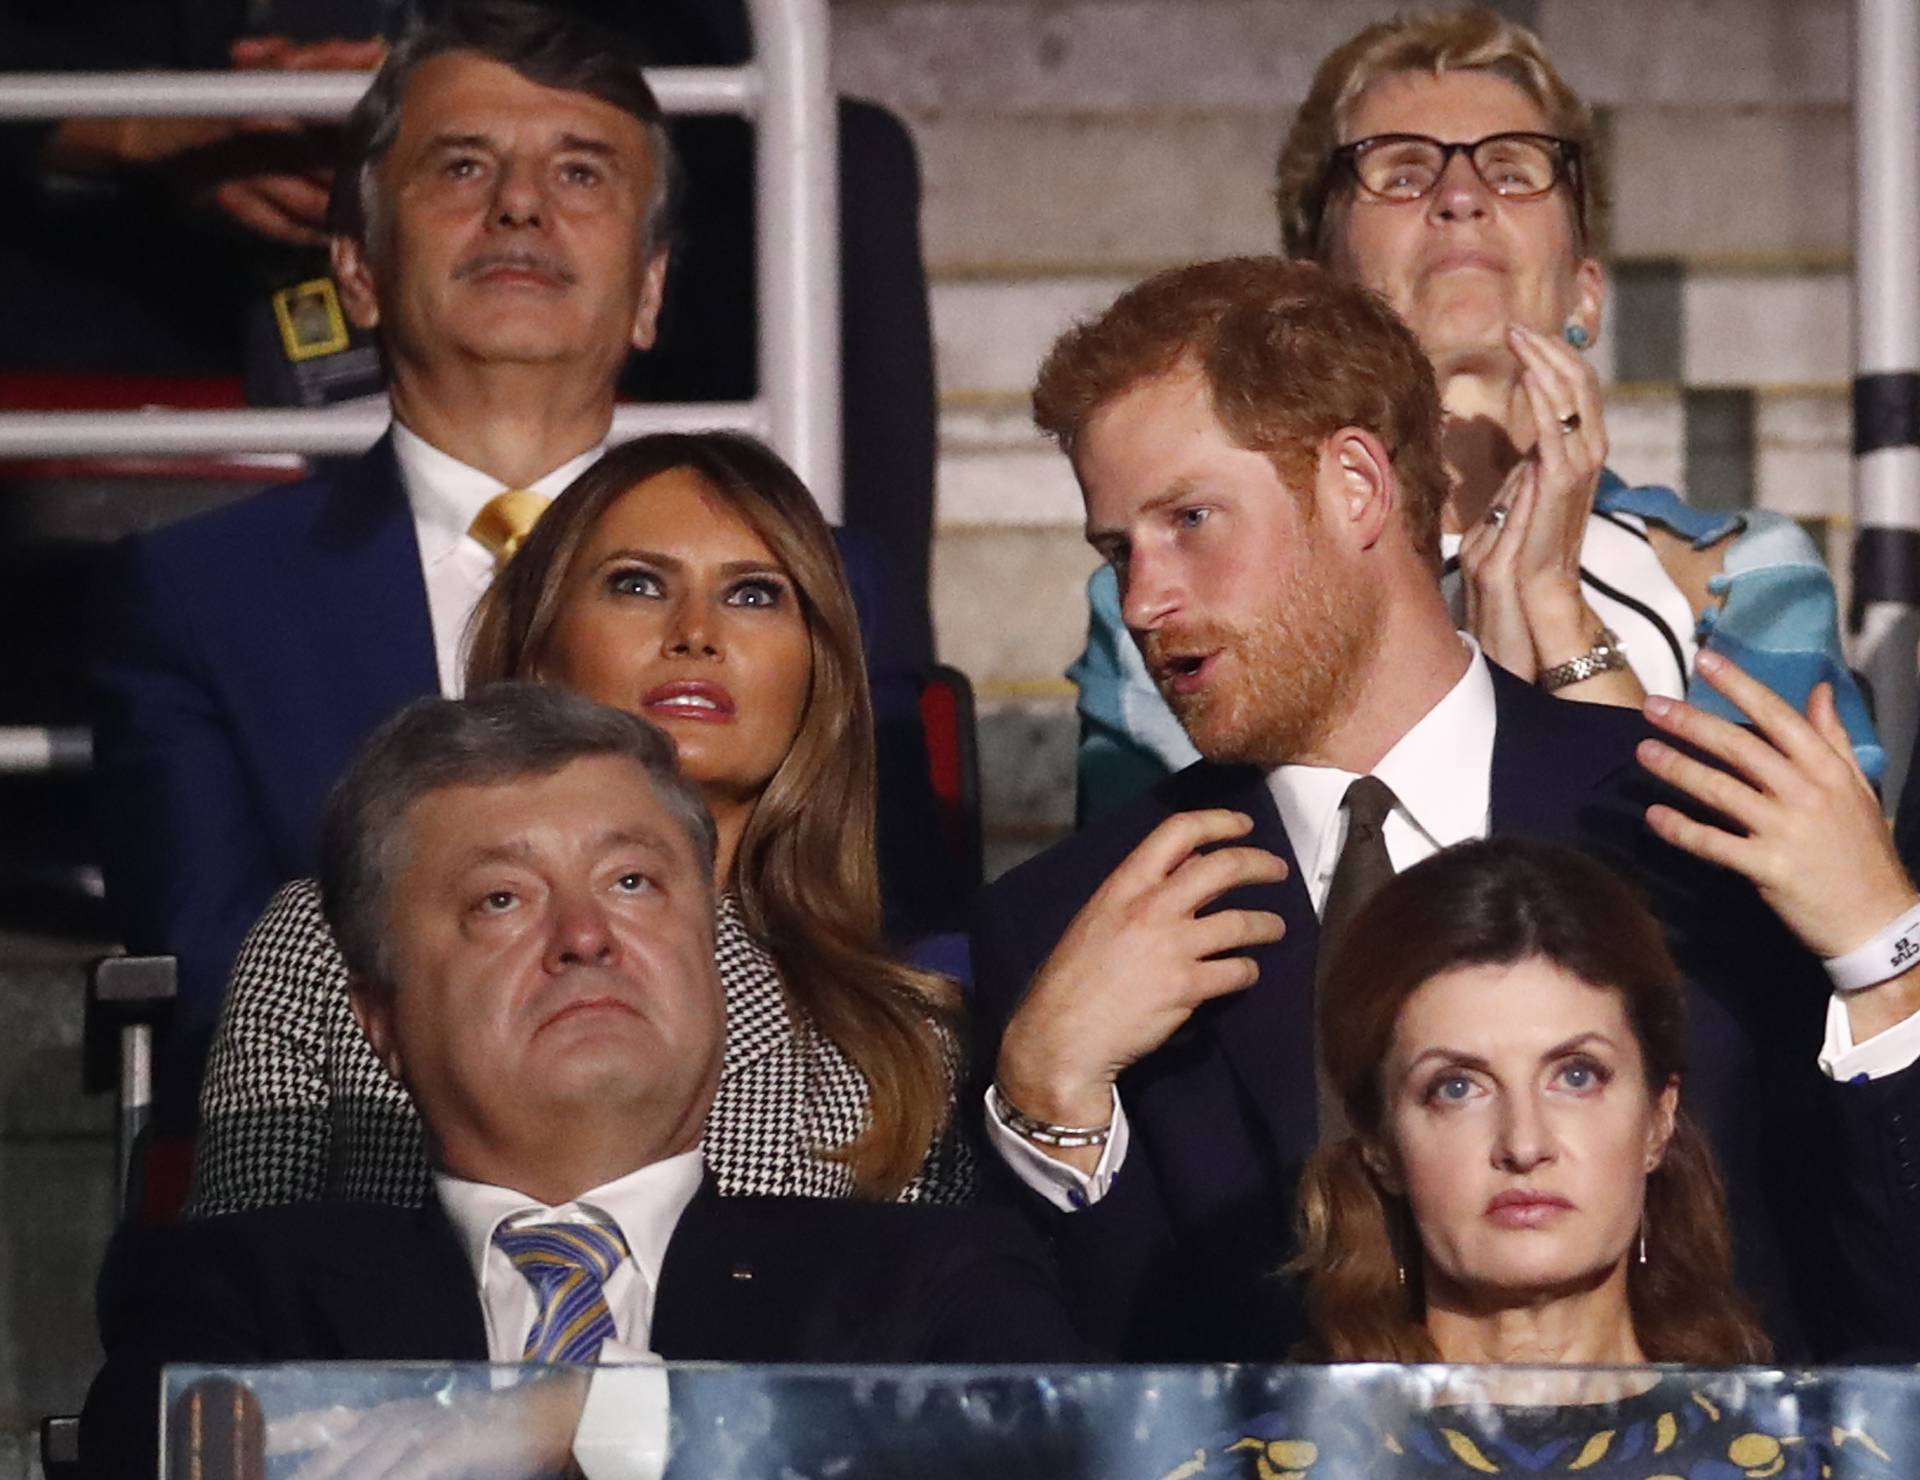 Dignitaries attend the opening ceremony for the Invictus Games in Toronto